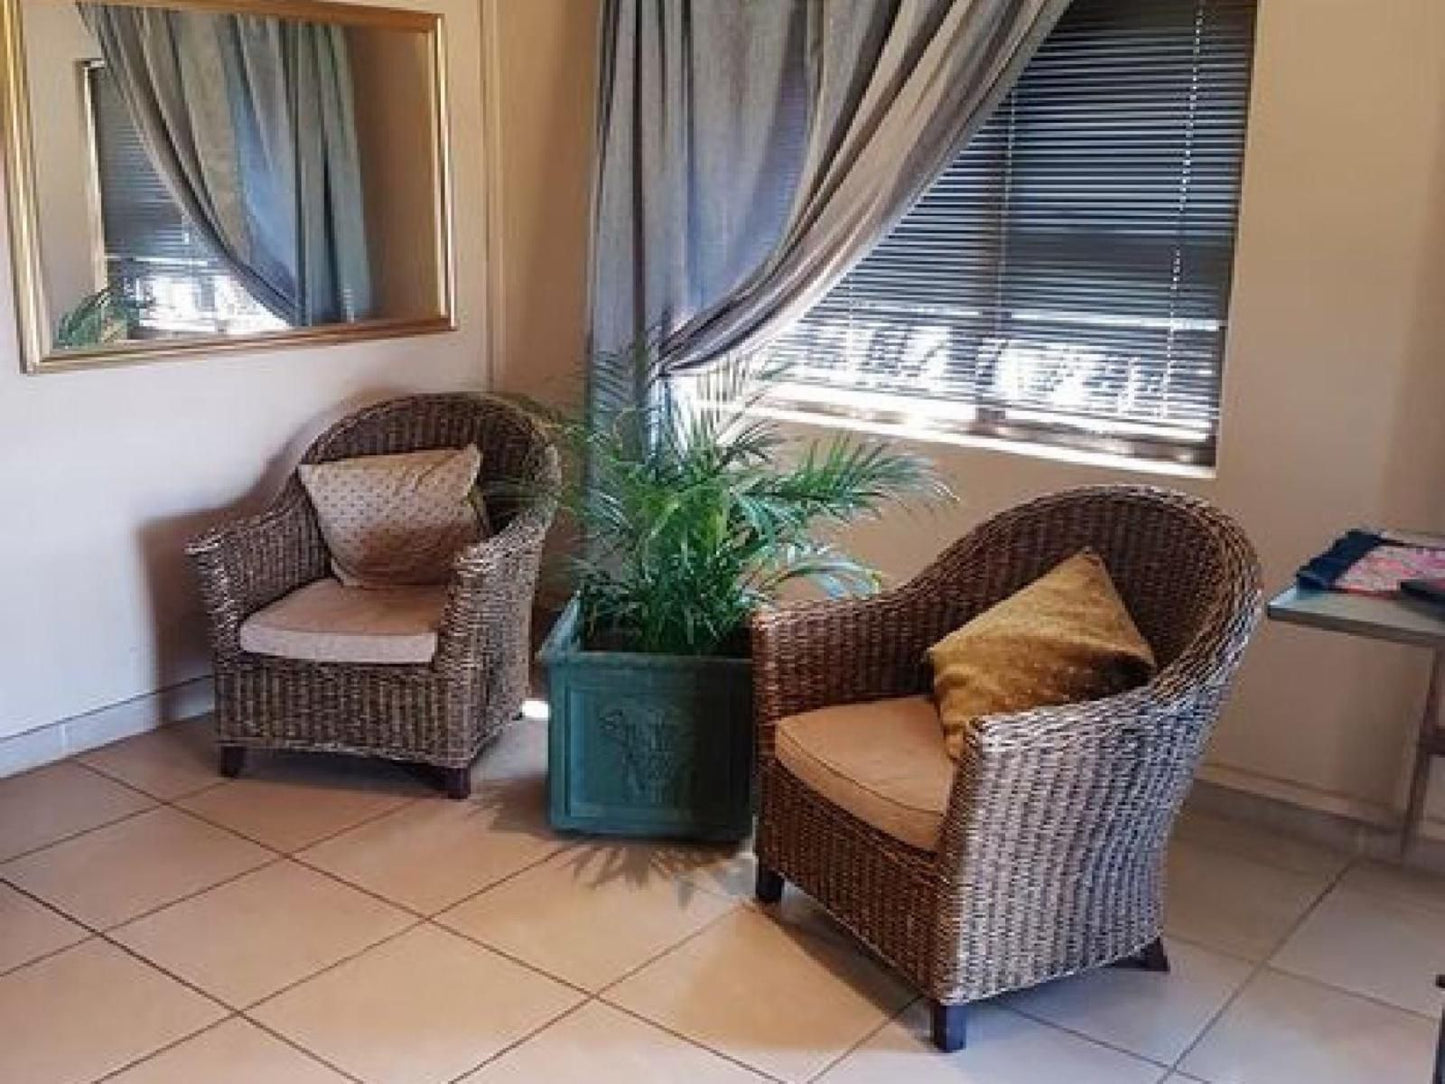 The Venue And Guest Rooms On Site Potchefstroom North West Province South Africa Living Room